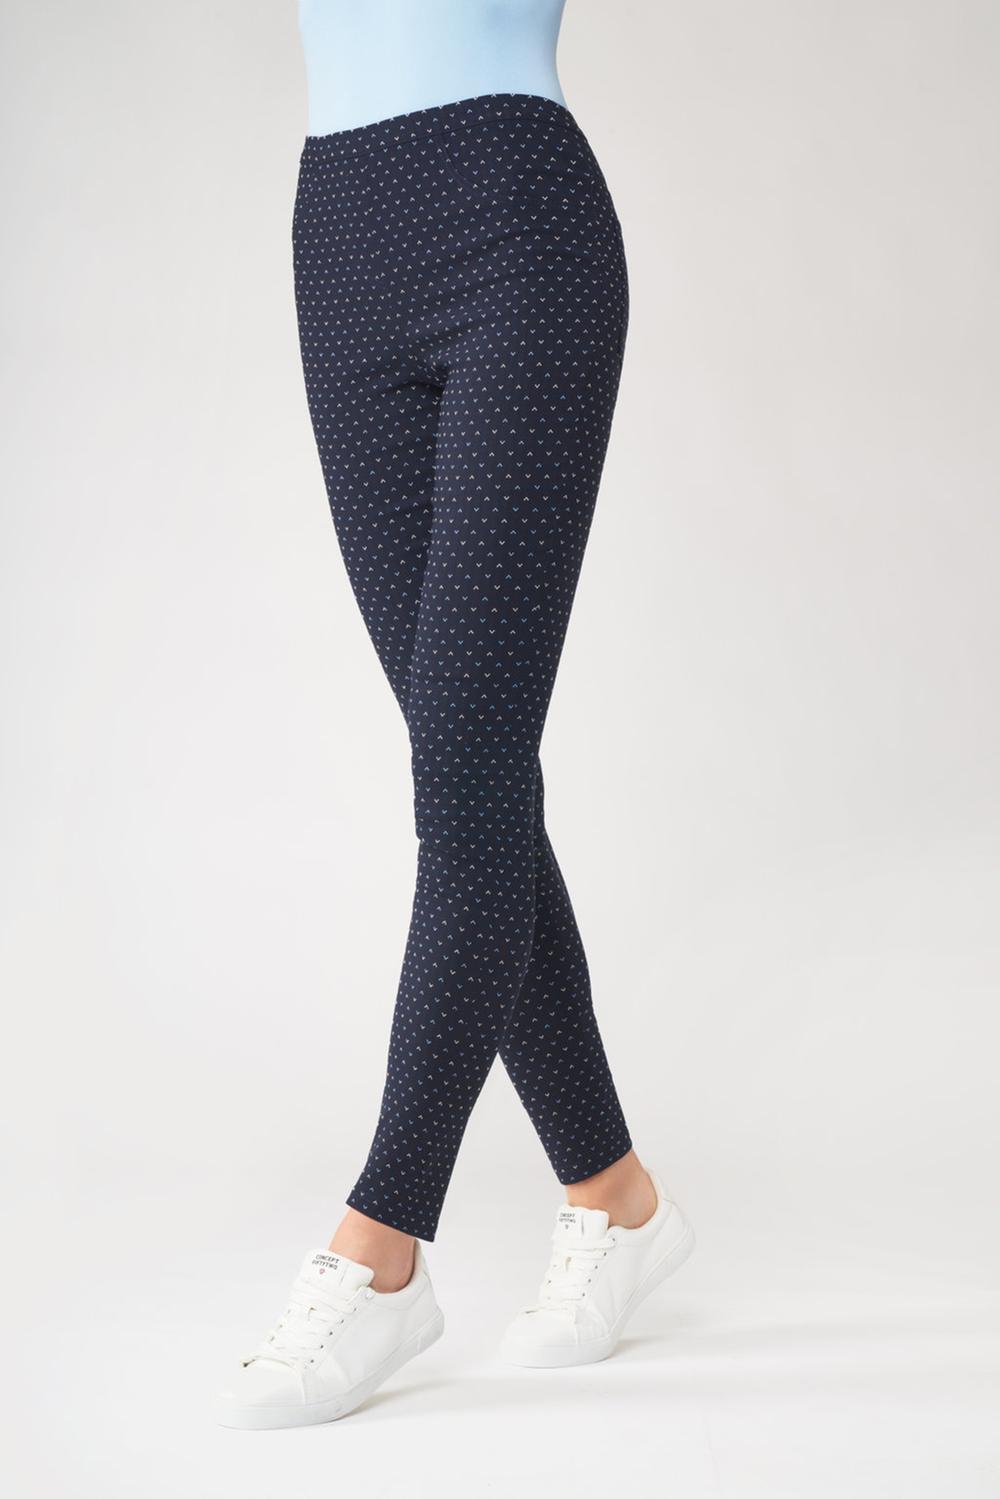 SiSi Microgeometria Legging - Navy stretch trouser leggings made of viscose with a woven v style pattern in light blue and white and navy, blue and white striped turn up cuff and rear pockets.